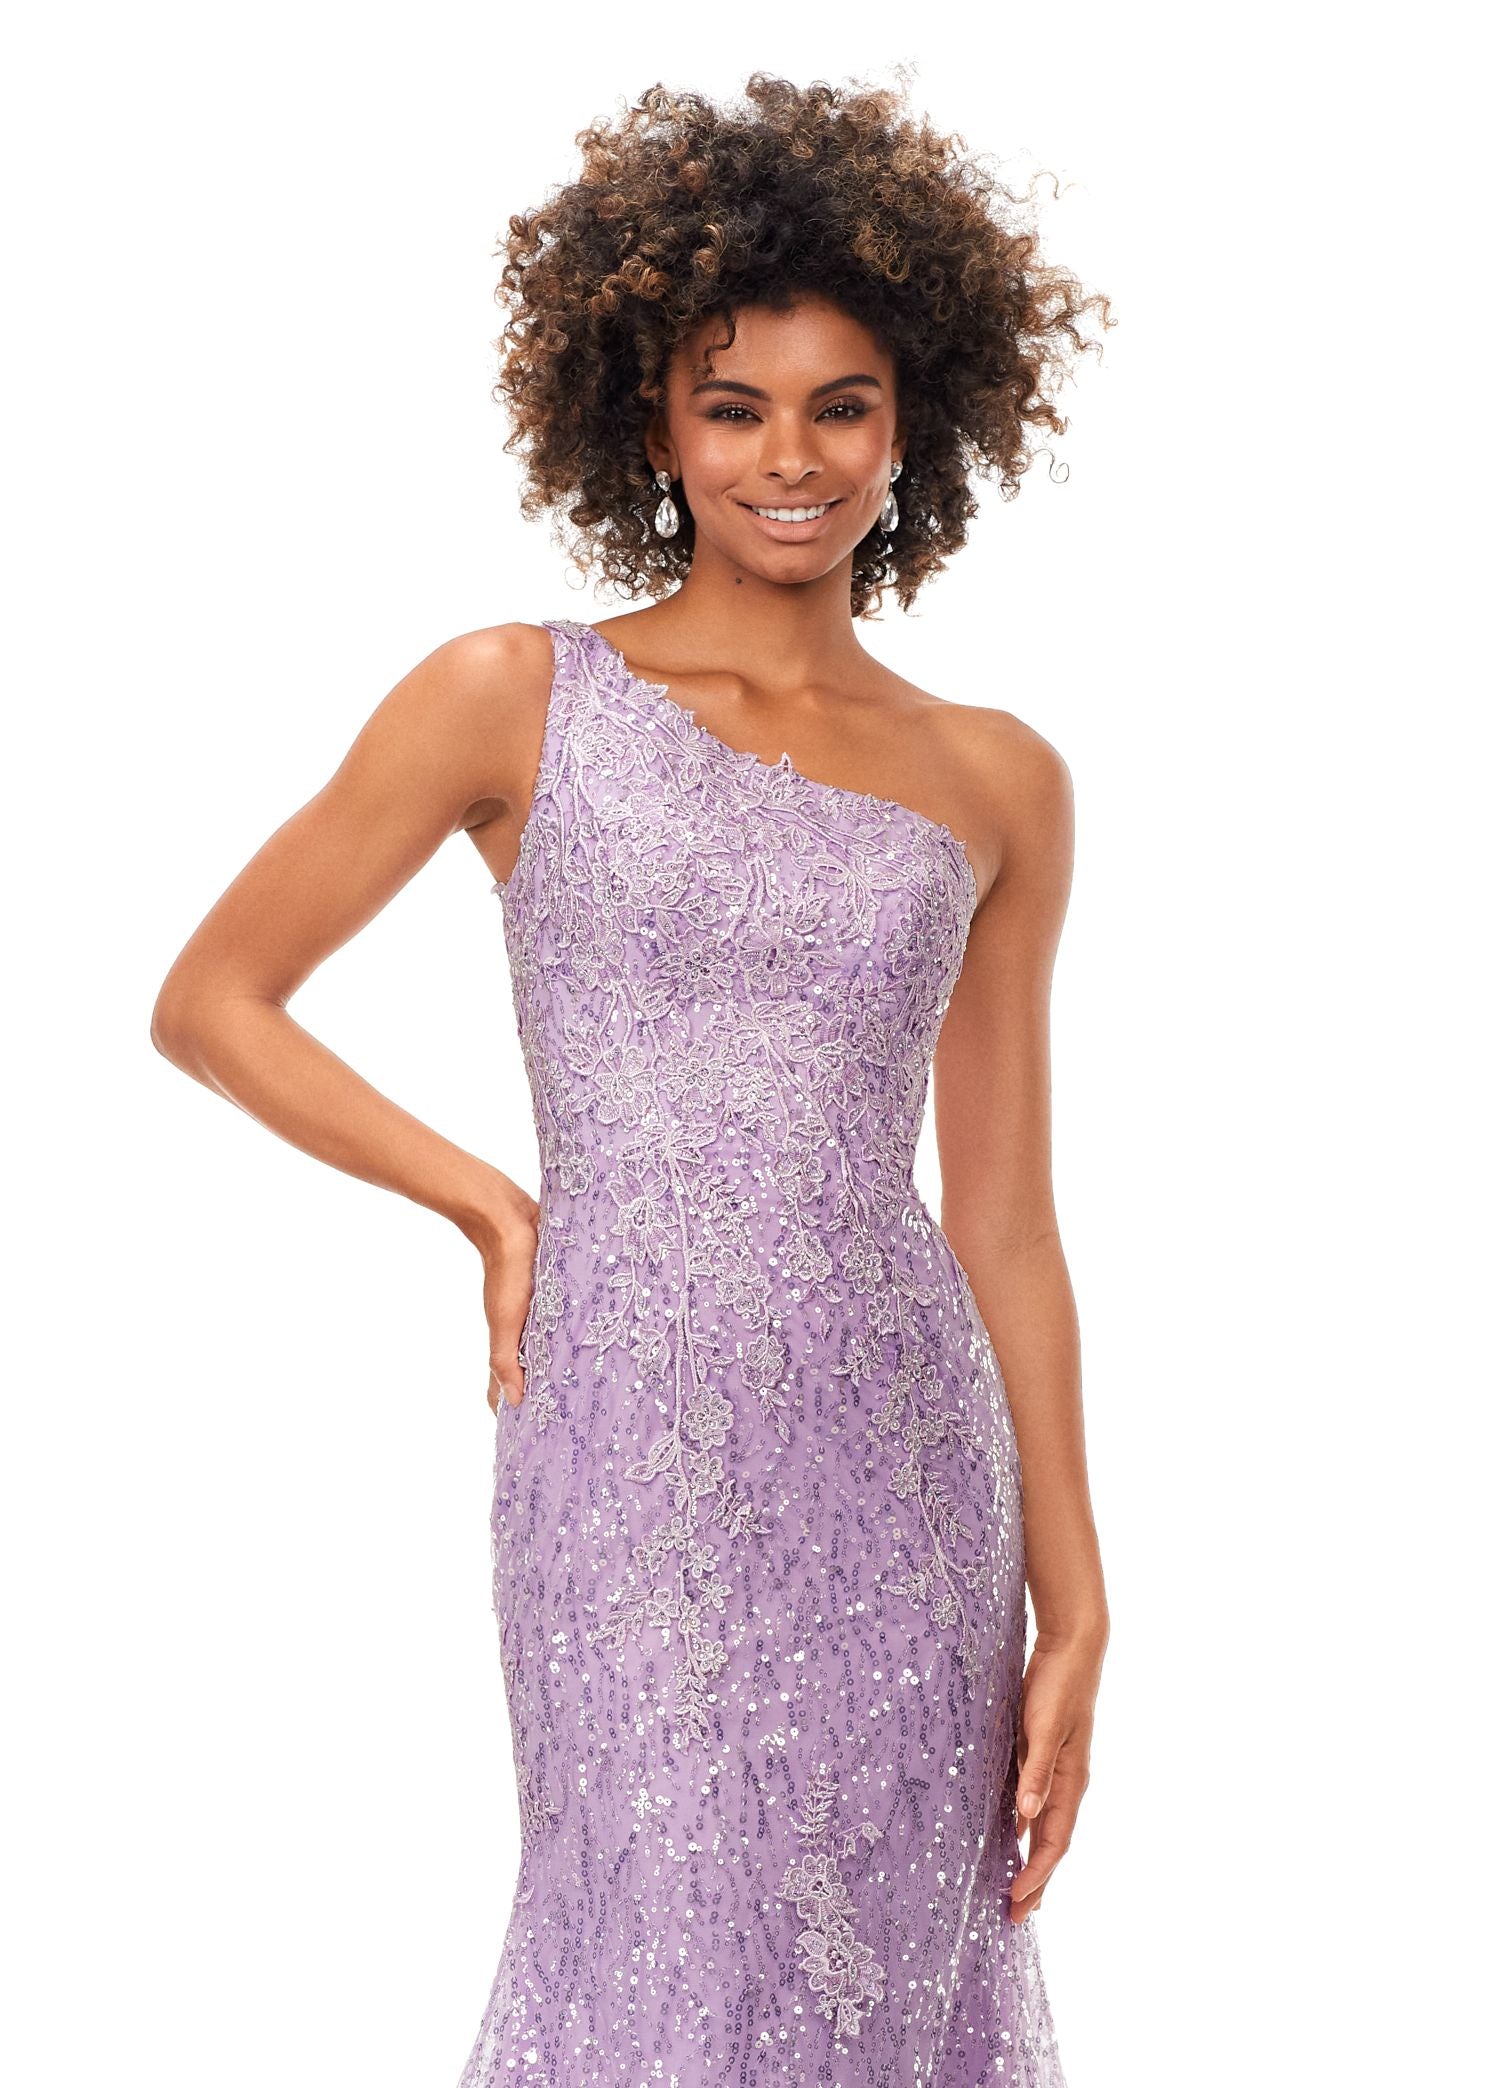 Ashley Lauren 11334 Feel ultra glamourous in this one shouldersequin gown. The bodice is embellished with lace appliques that cascade down onto the fitted skirt. The look is complete with a full zipper back. One Shoulder Fitted Skirt Sequin Applique Sweep Train COLORS: Sky, Lilac